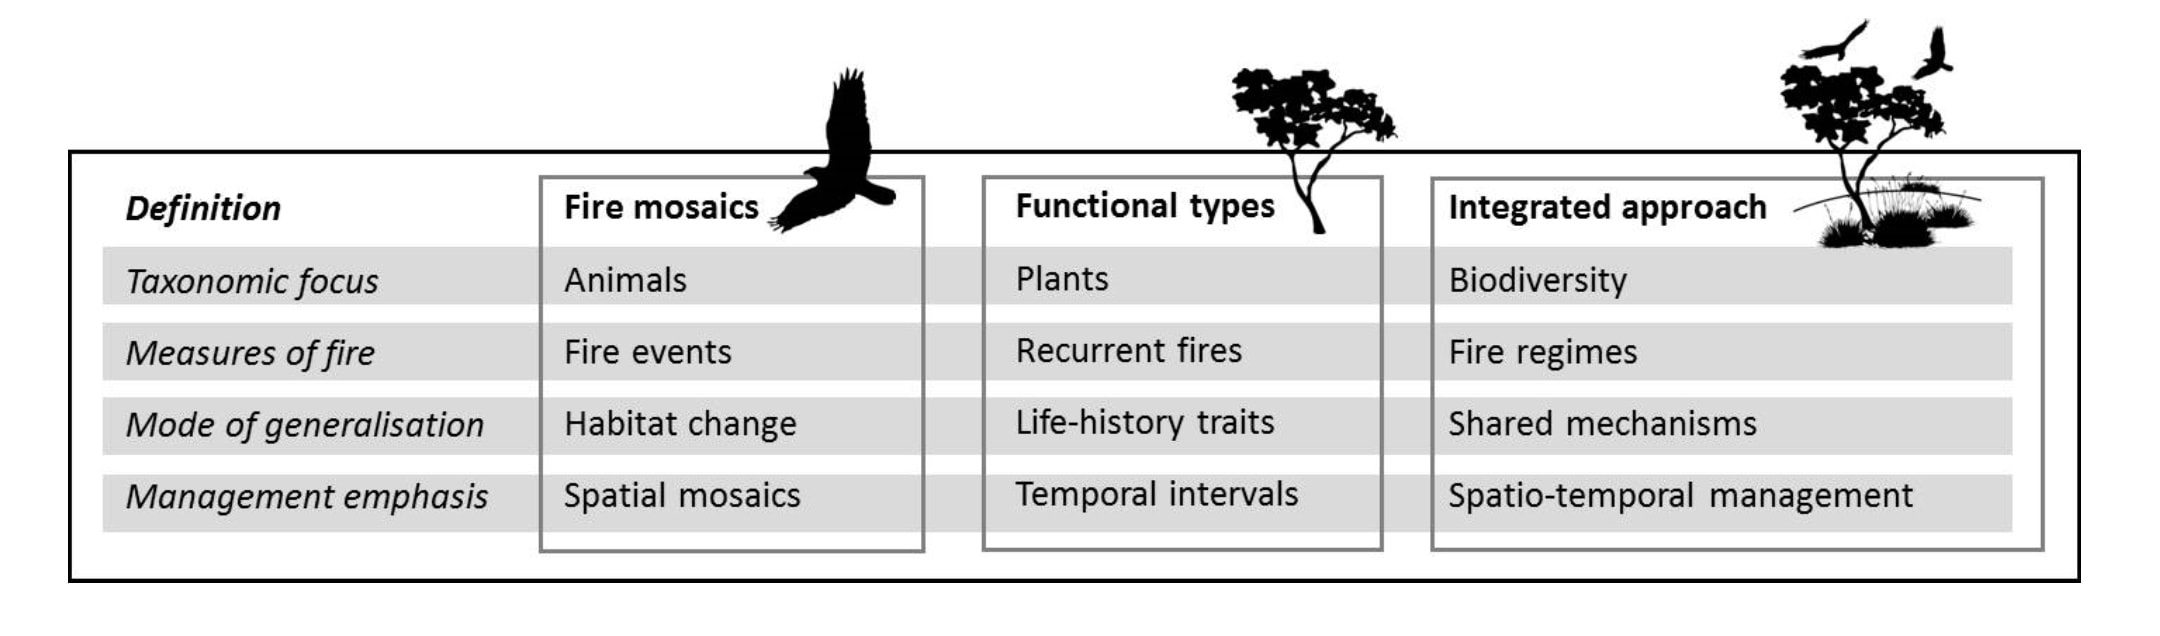 Bridging the animal and plant divide in fire ecology - DisruptEcology Lab